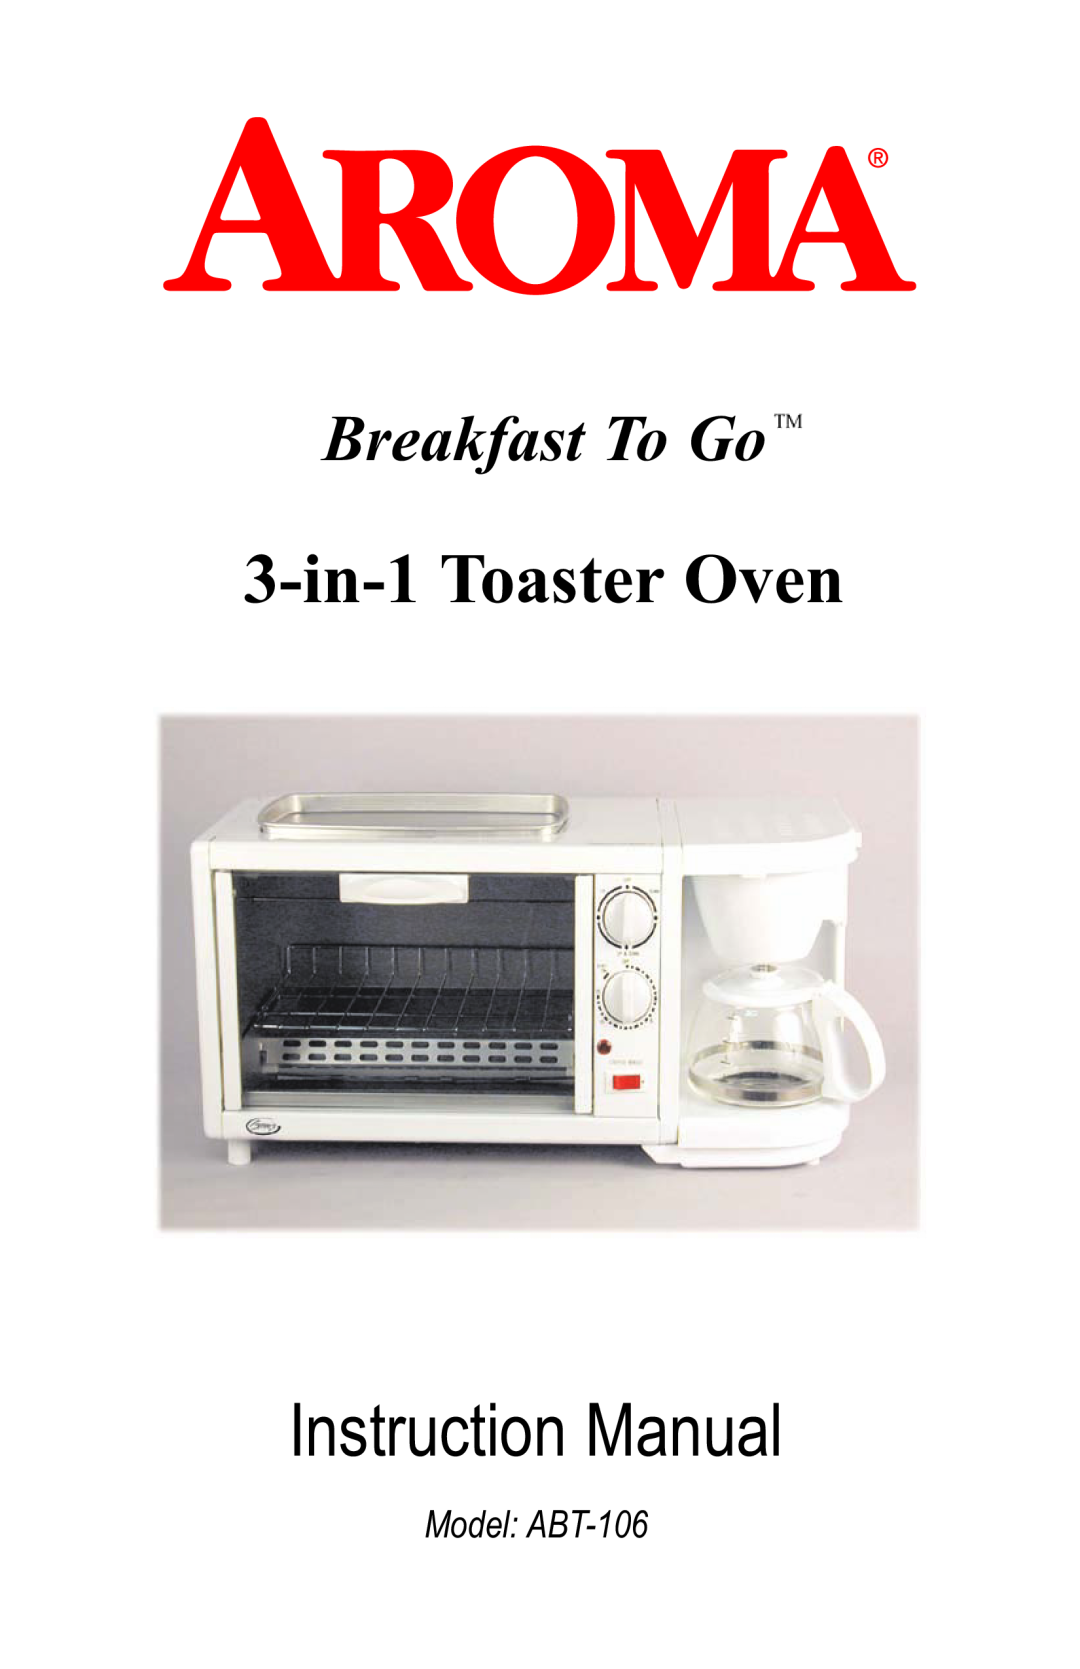 Aroma instruction manual 3-in-1Toaster Oven, Breakfast To Go, Model ABT-106 